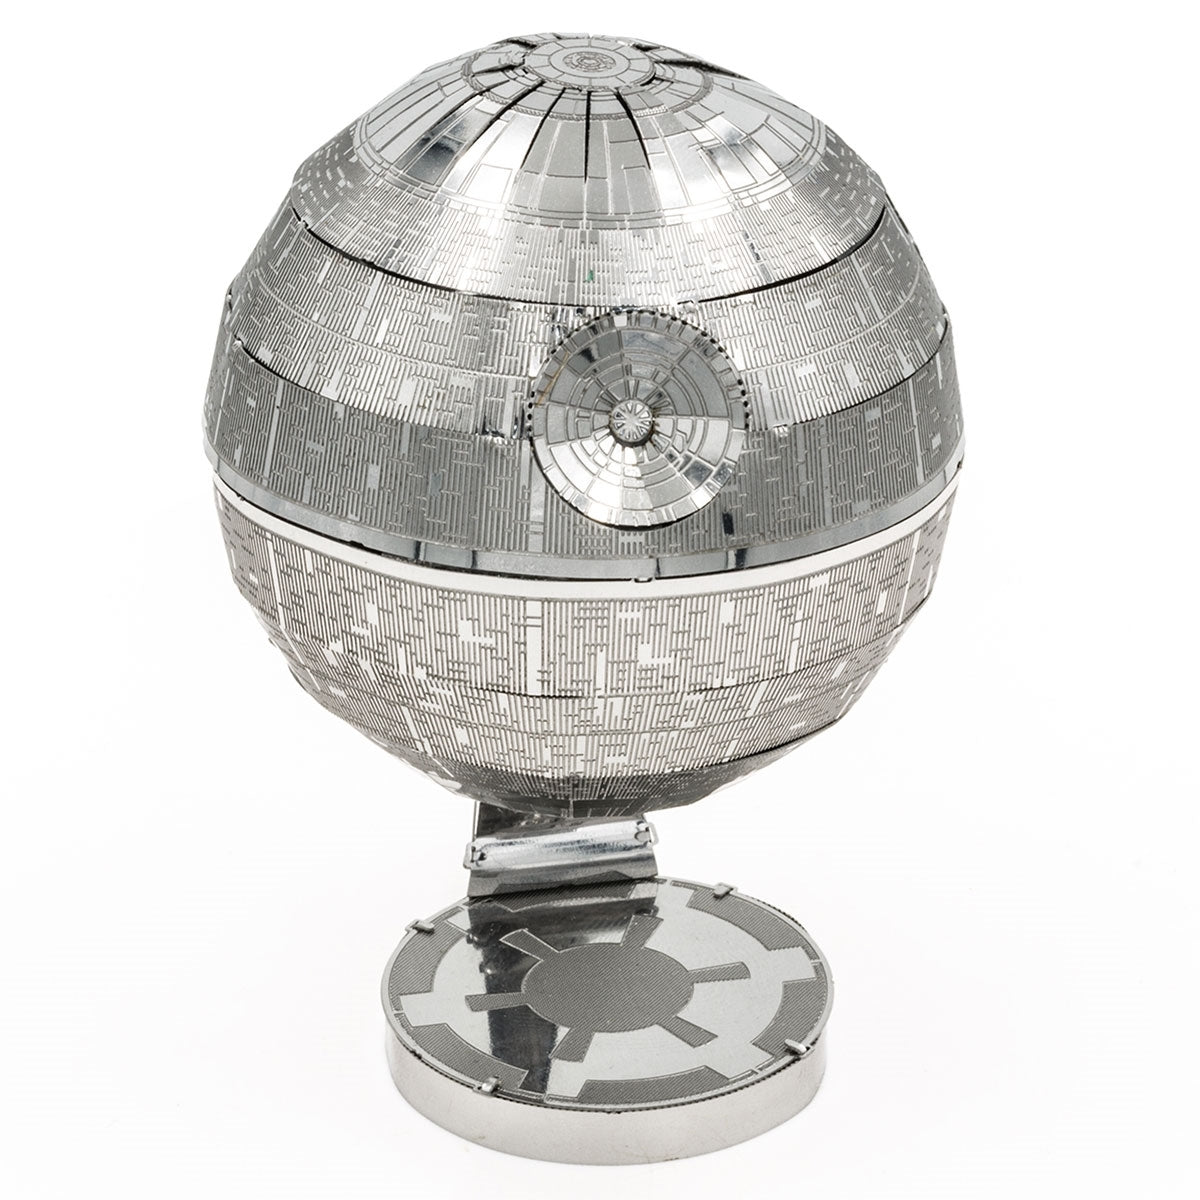 DEATH STAR - Steel 3D Model Kit gift puzzle puzzle